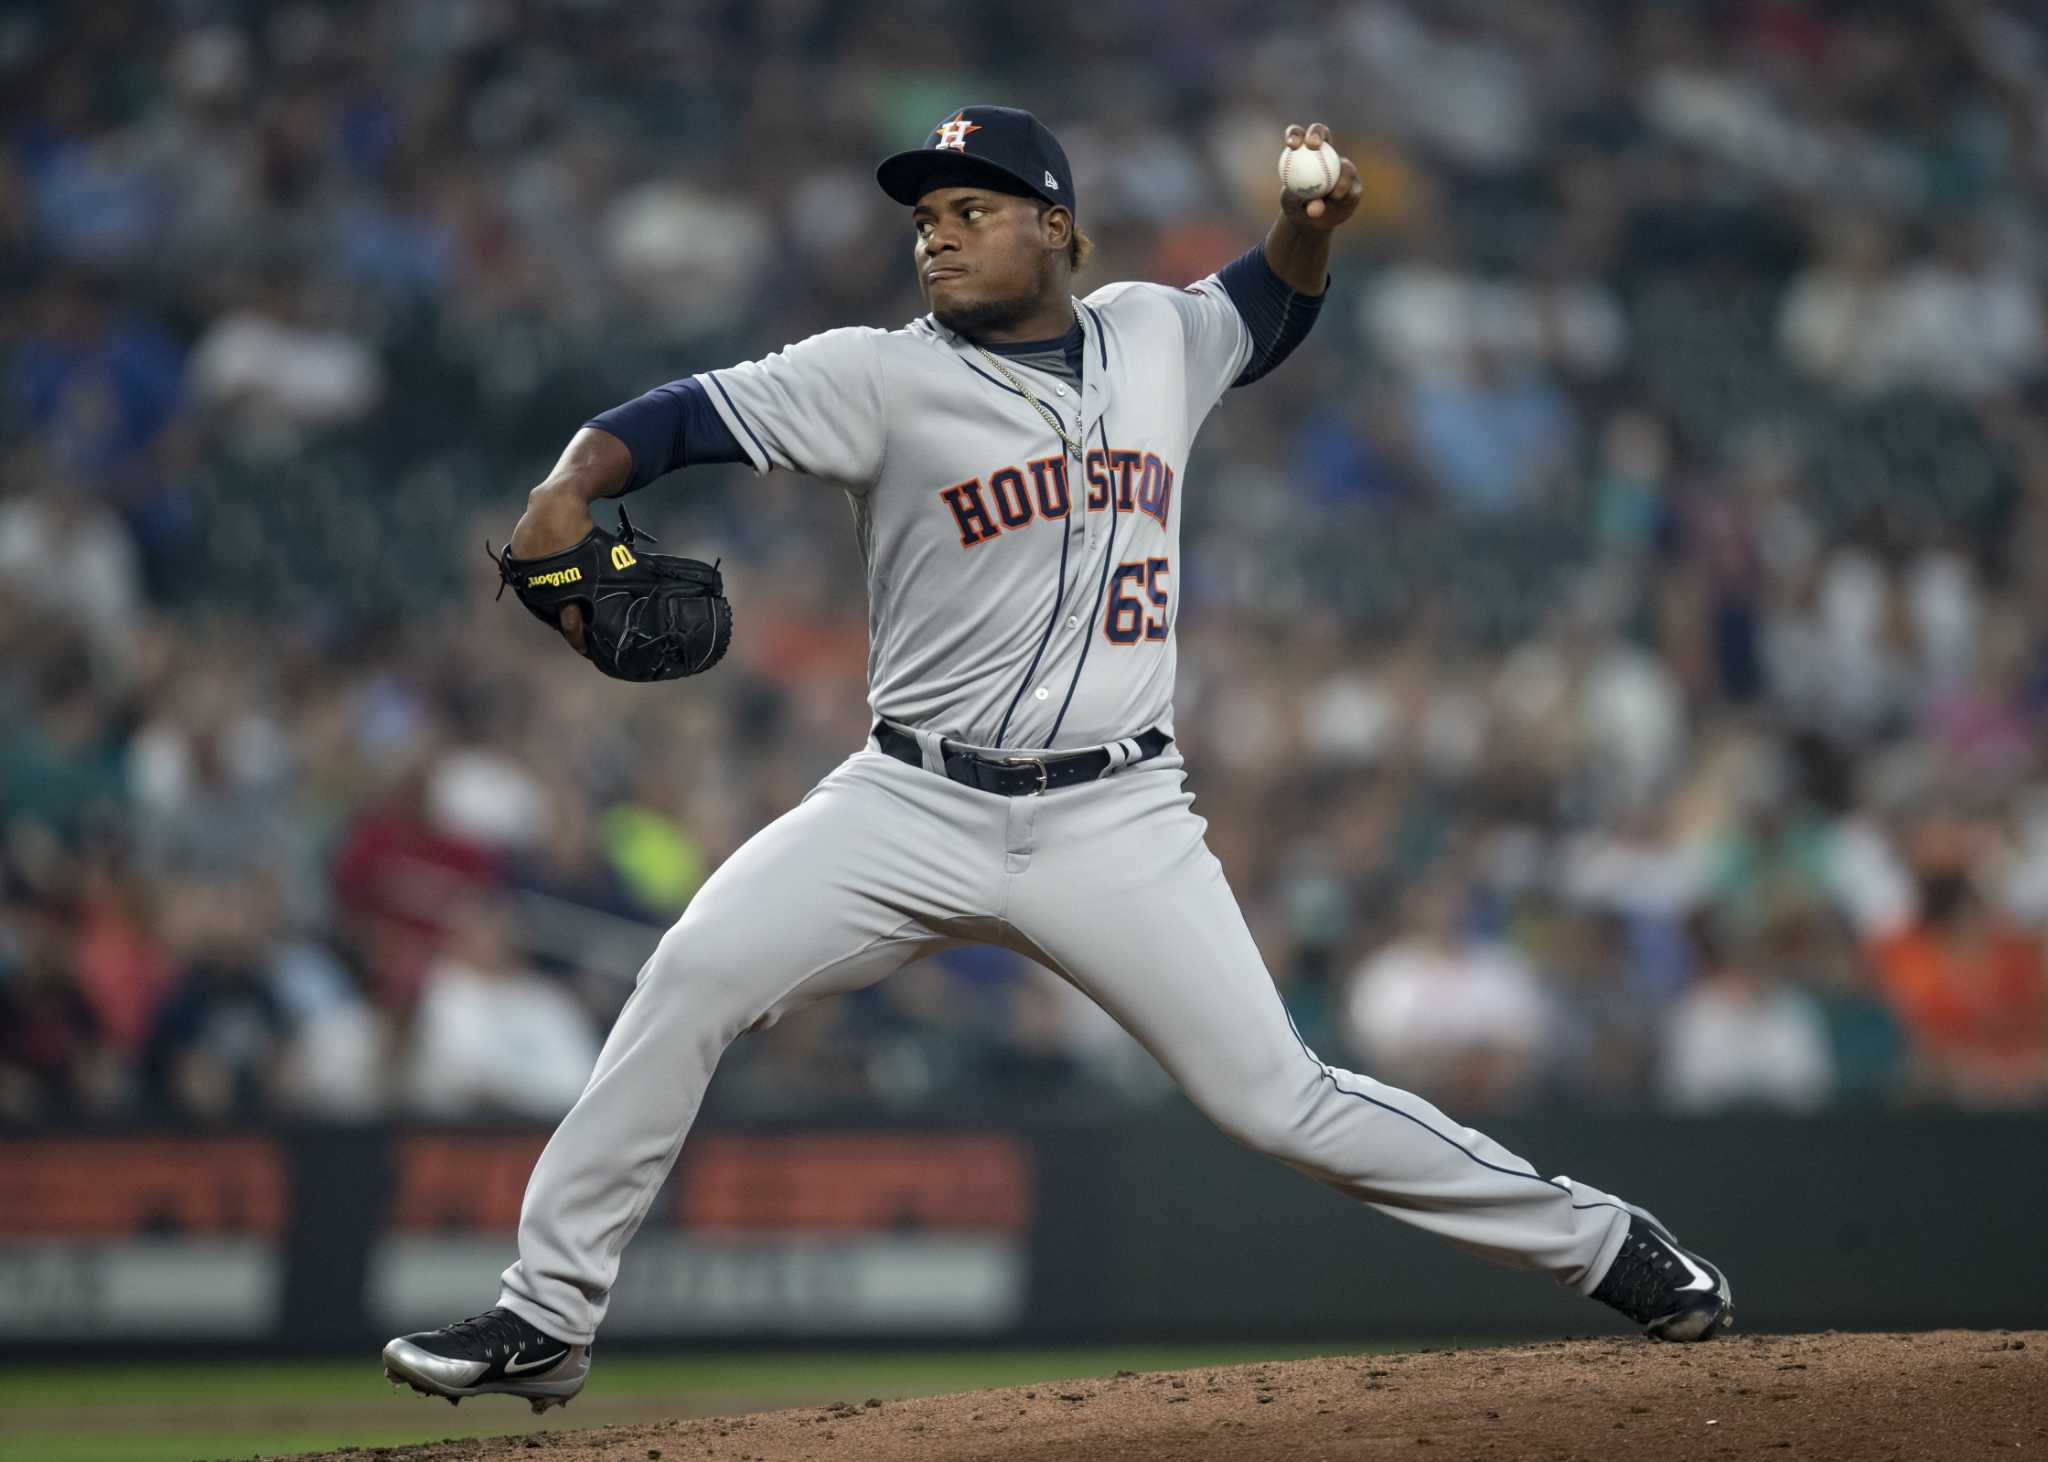 Rookie Framber Valdez boosts Astros to win over Mariners